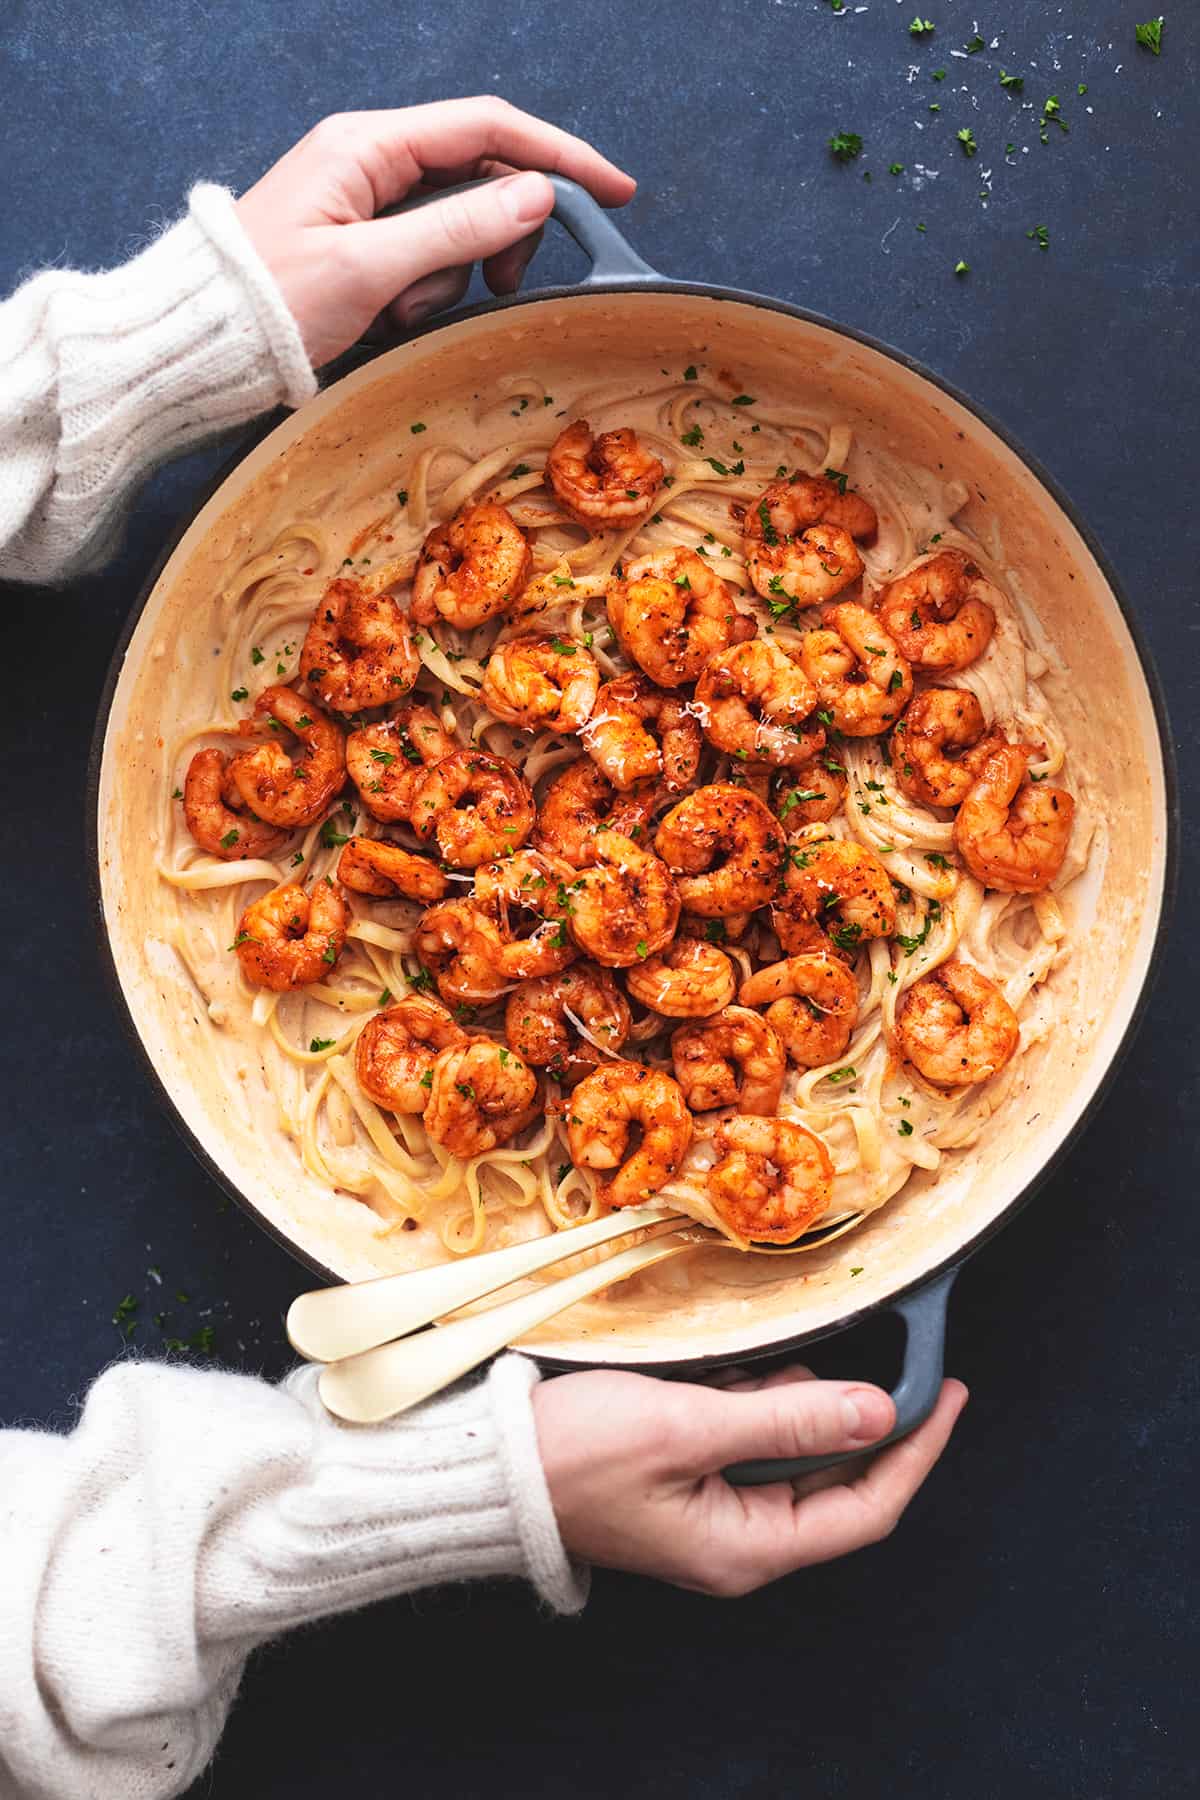 hands holding handles of a skillet filled with pasta noodles and cooked shrimp with two serving spoons